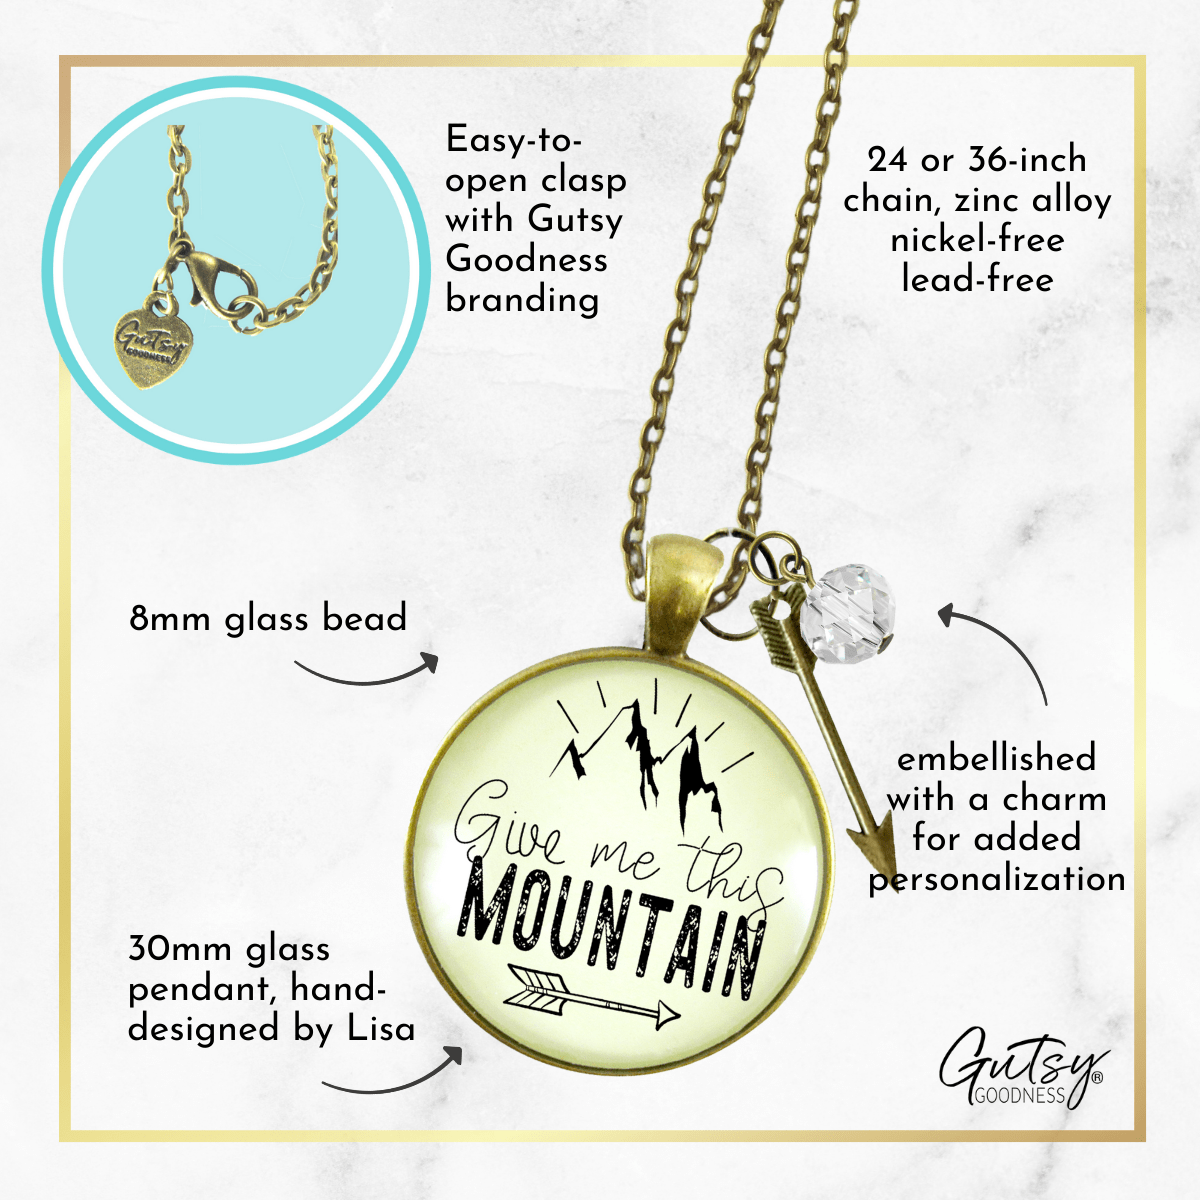 Gutsy Goodness Give Me This Mountain Motivational Necklace Pendant Mantra Quote Arrow Charm - Gutsy Goodness Handmade Jewelry;Give Me This Mountain Motivational Necklace Pendant Mantra Quote Arrow Charm - Gutsy Goodness Handmade Jewelry Gifts